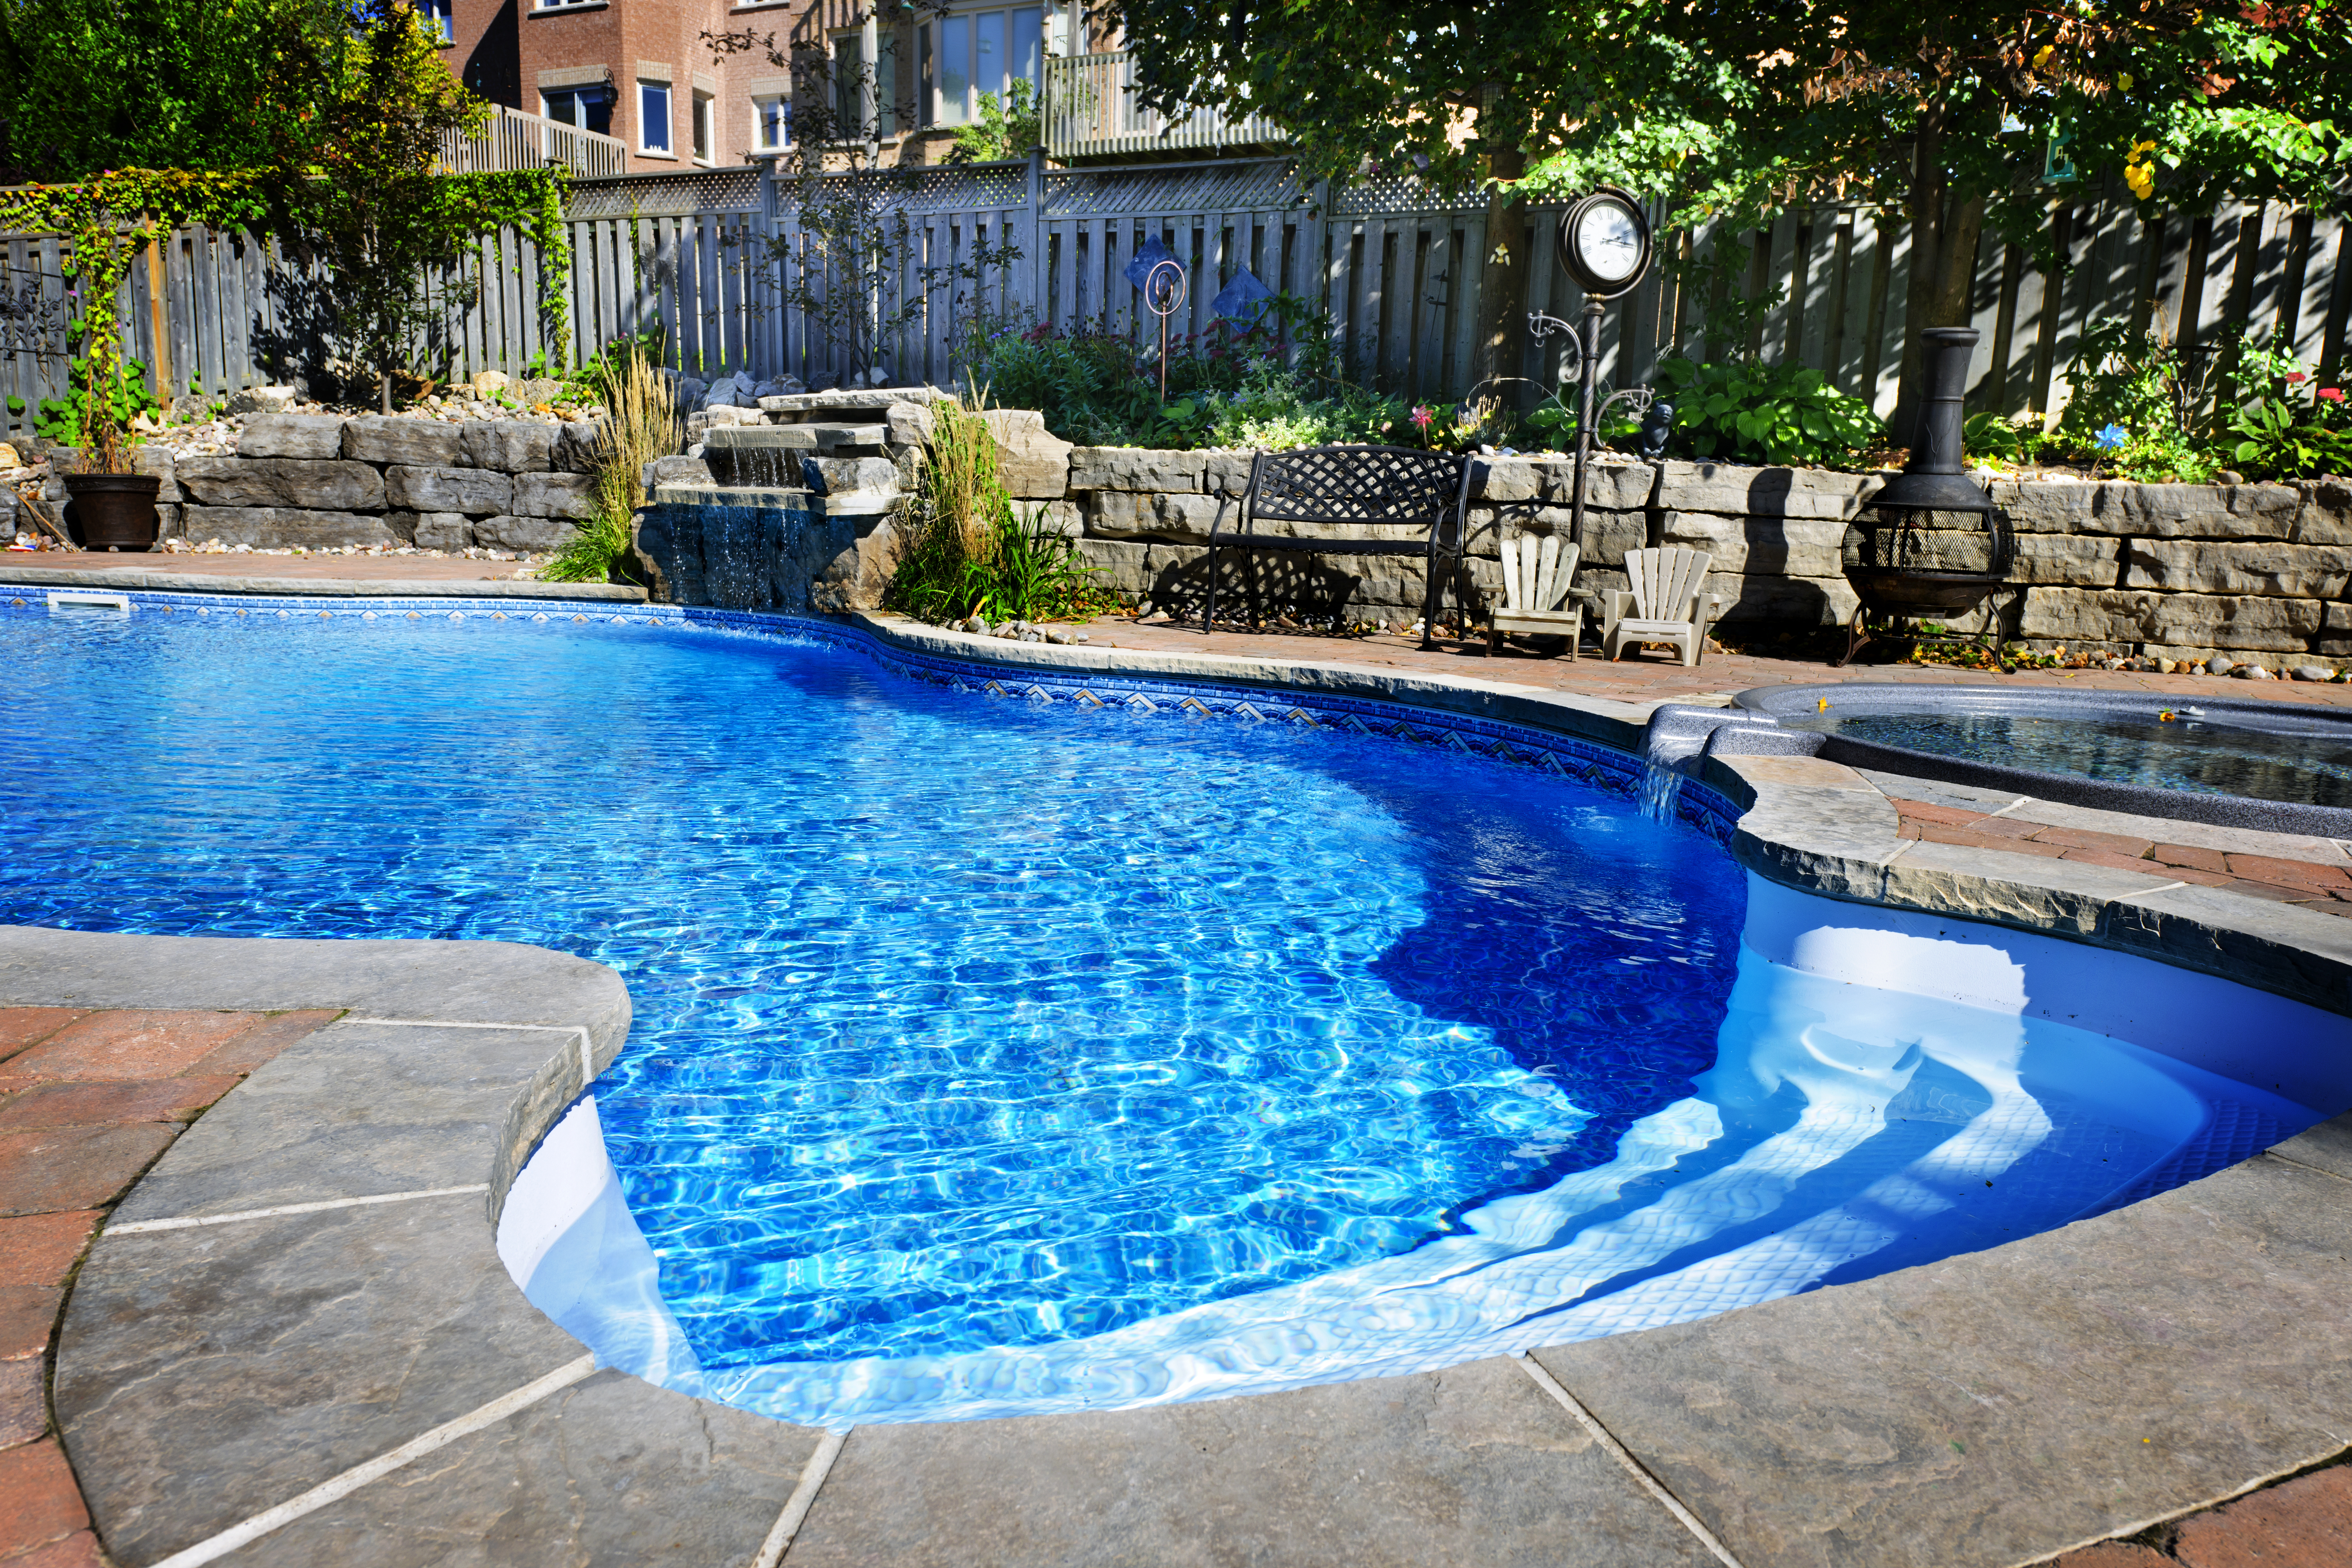 How To Know That You Need To Hire A Professional Pool Service